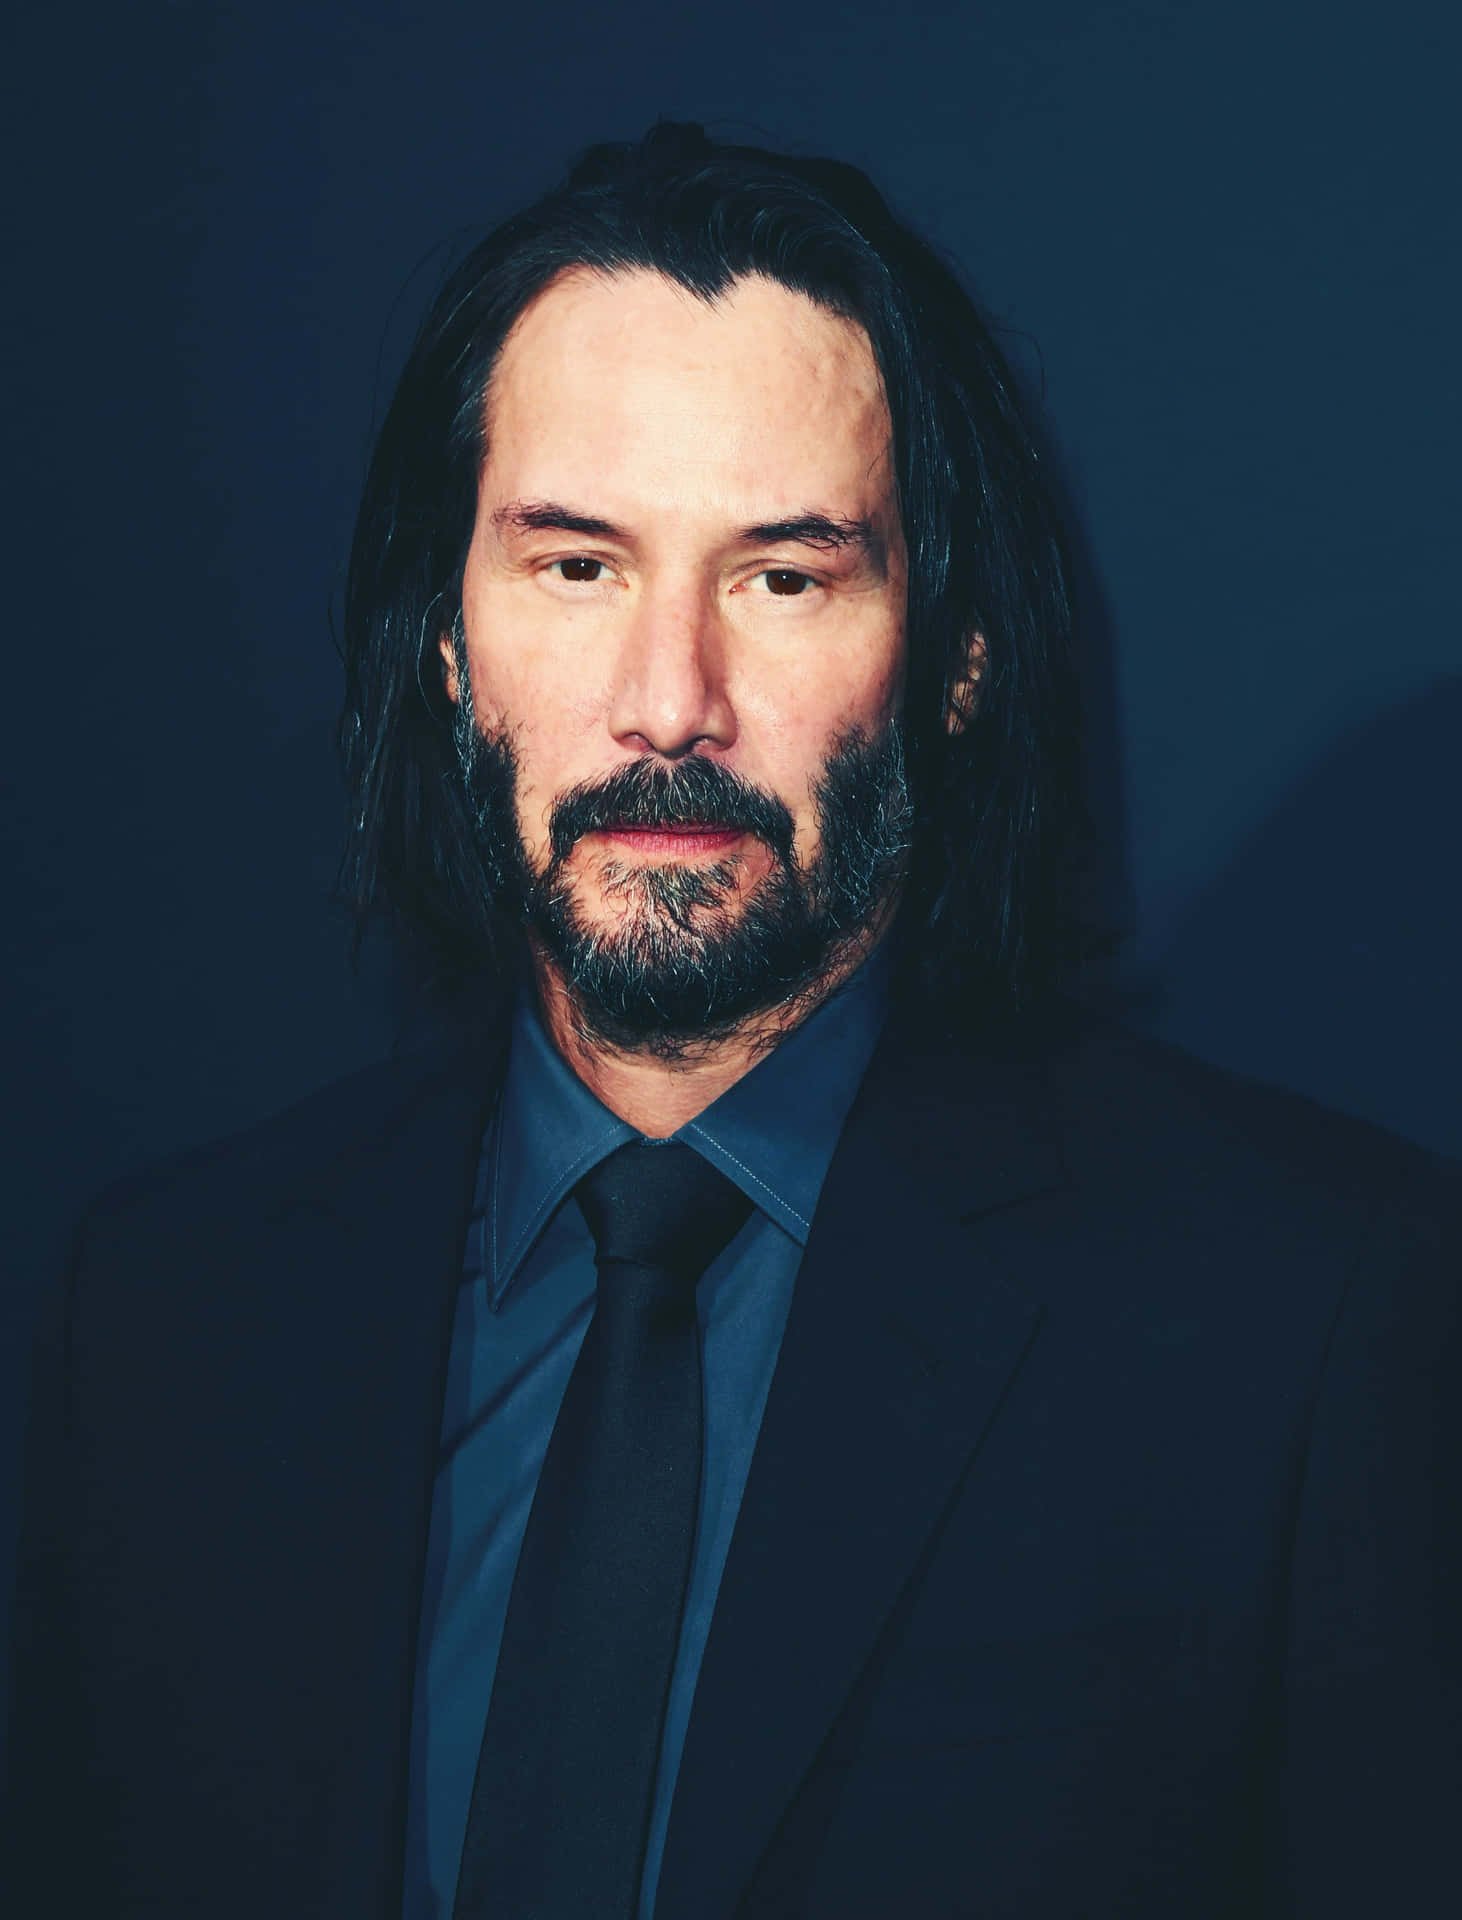 Keanu Reeves in a casual photoshoot